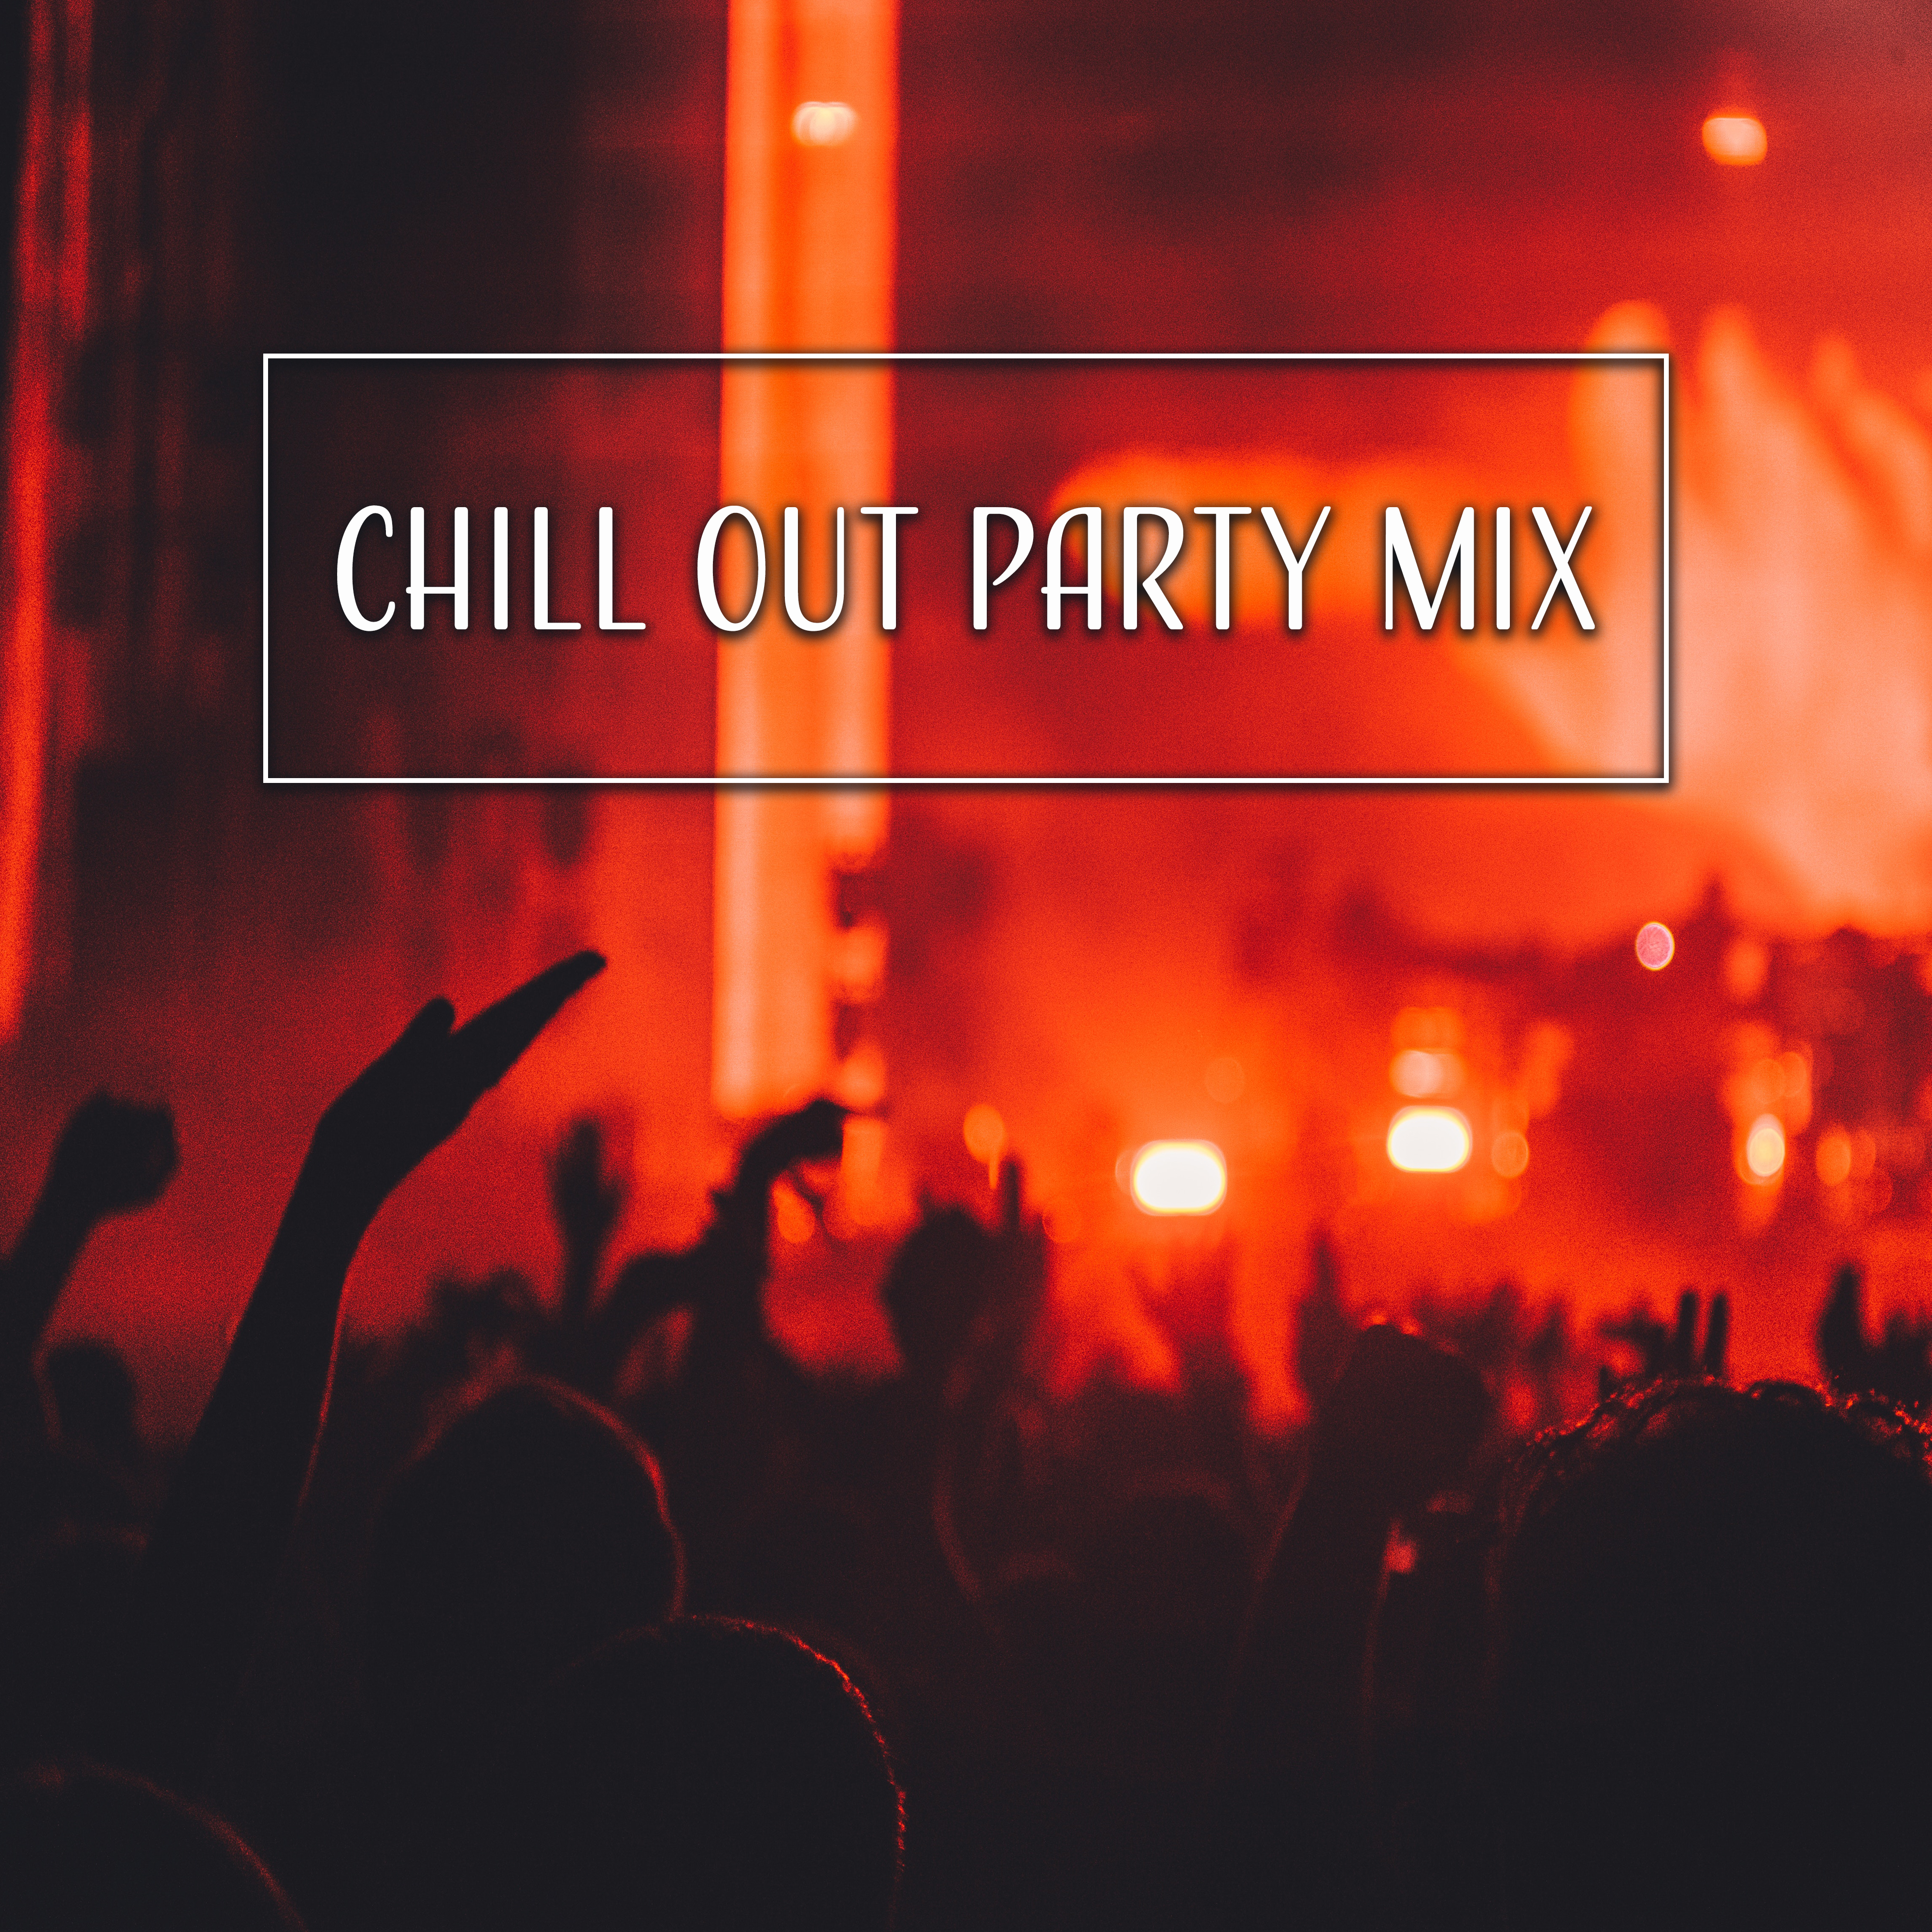 Chill Out Party Mix  New Chillout Beats, Chill Out Music, Relax, Party, Beach House, Lounge